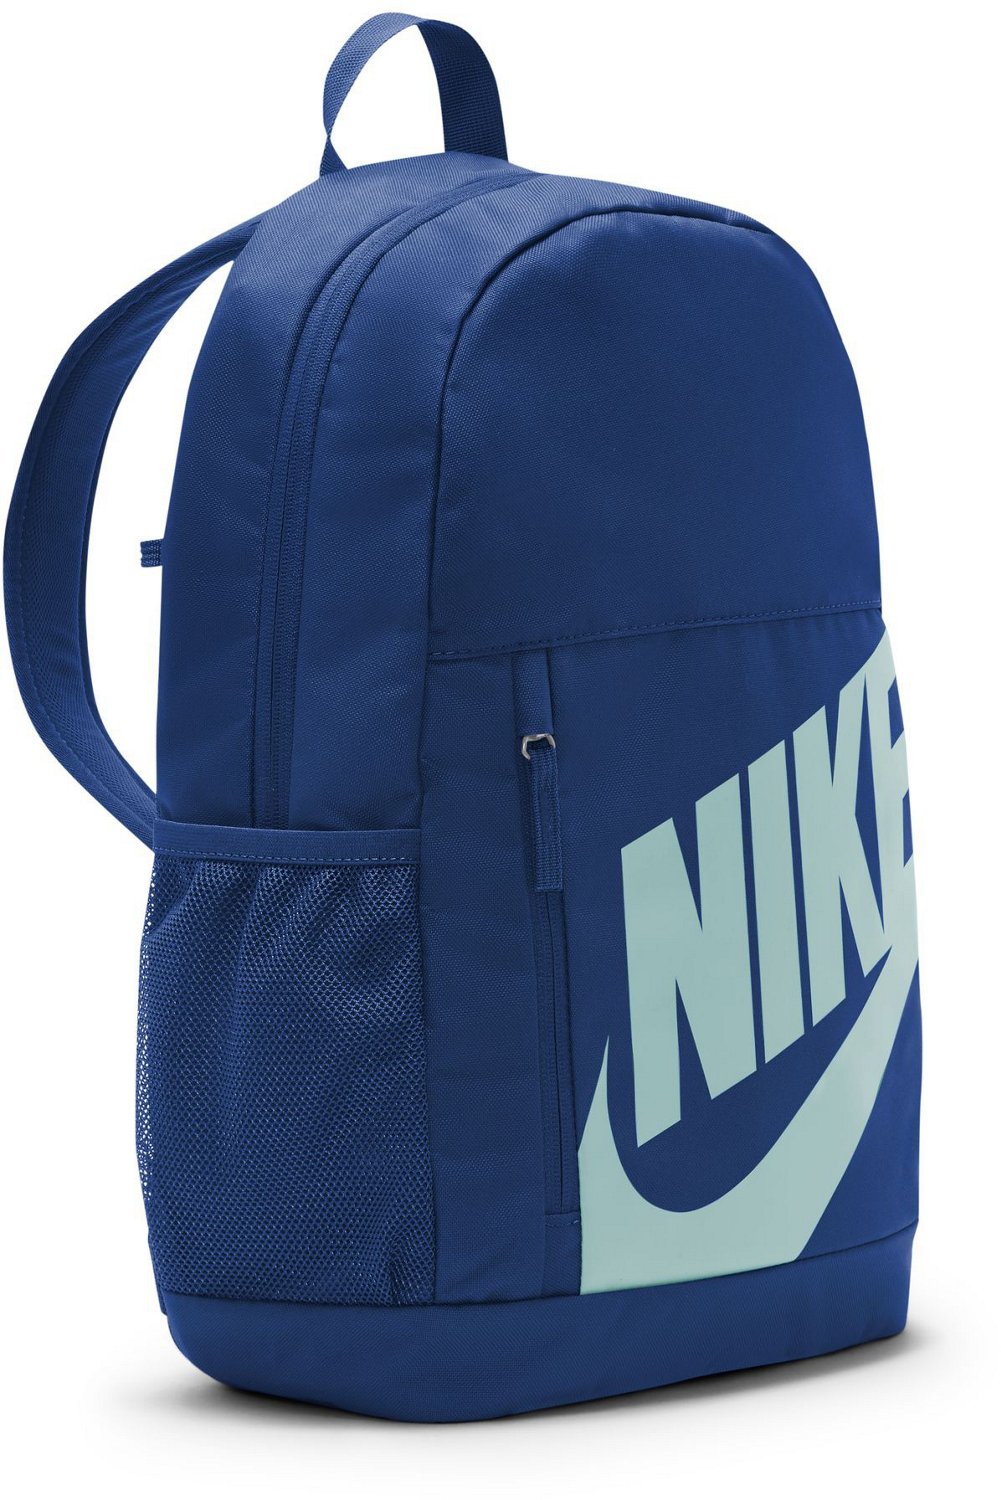 Nike Kids' Elemental Backpack | Free Shipping at Academy